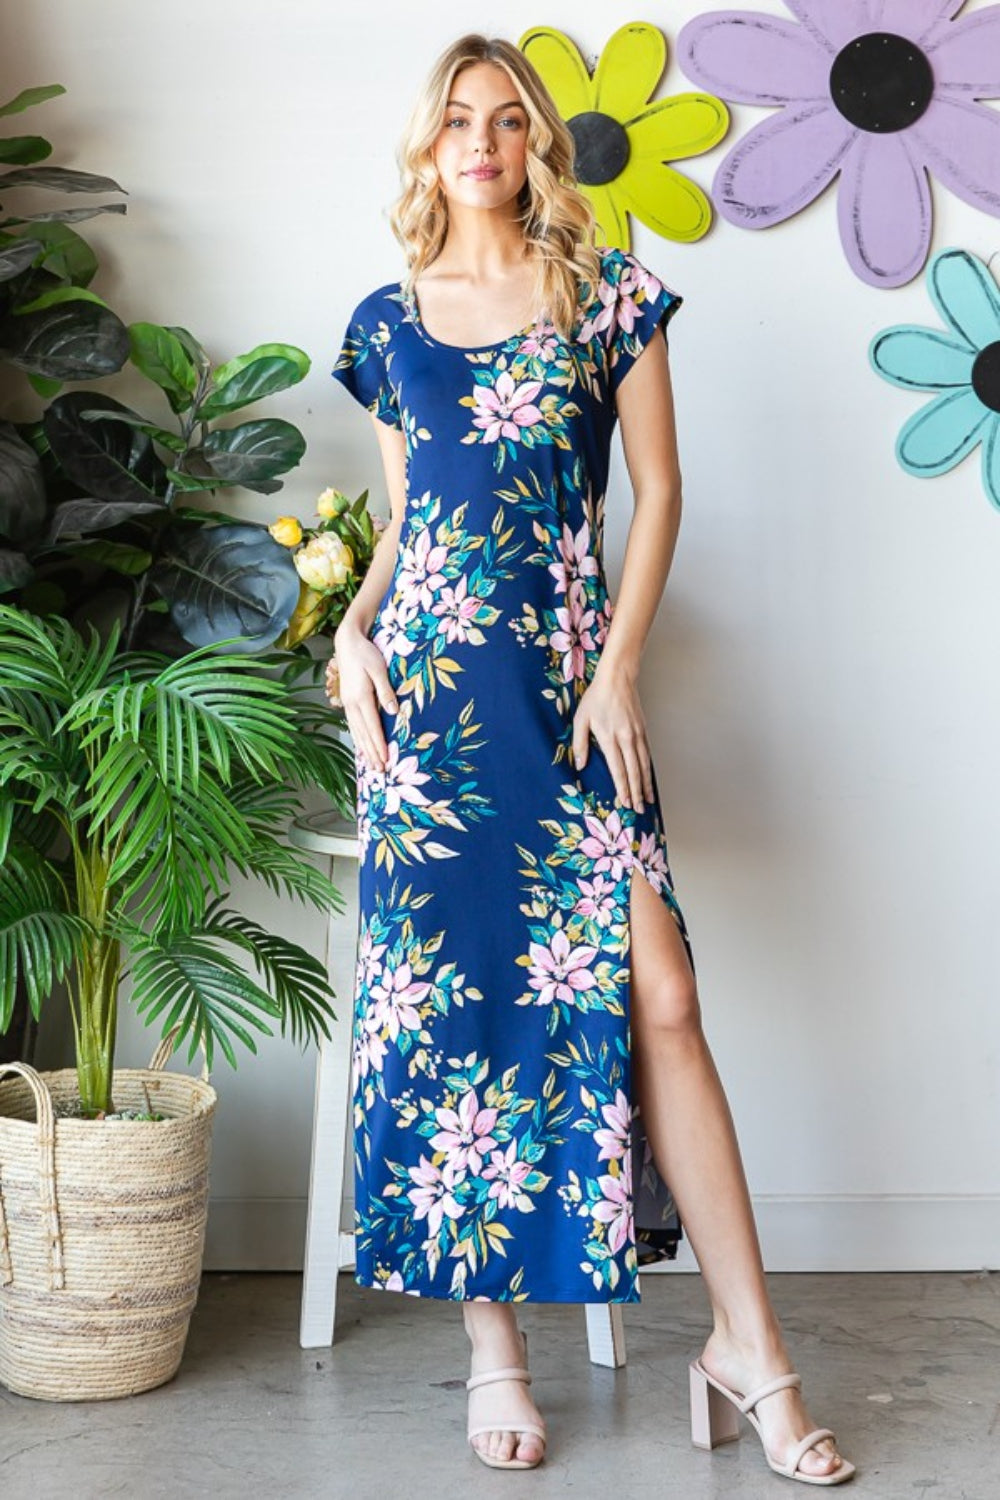 Beach Wedding Guest Elegance: Royal Full-Size Floral Dress with Short Sleeves and Graceful Slit